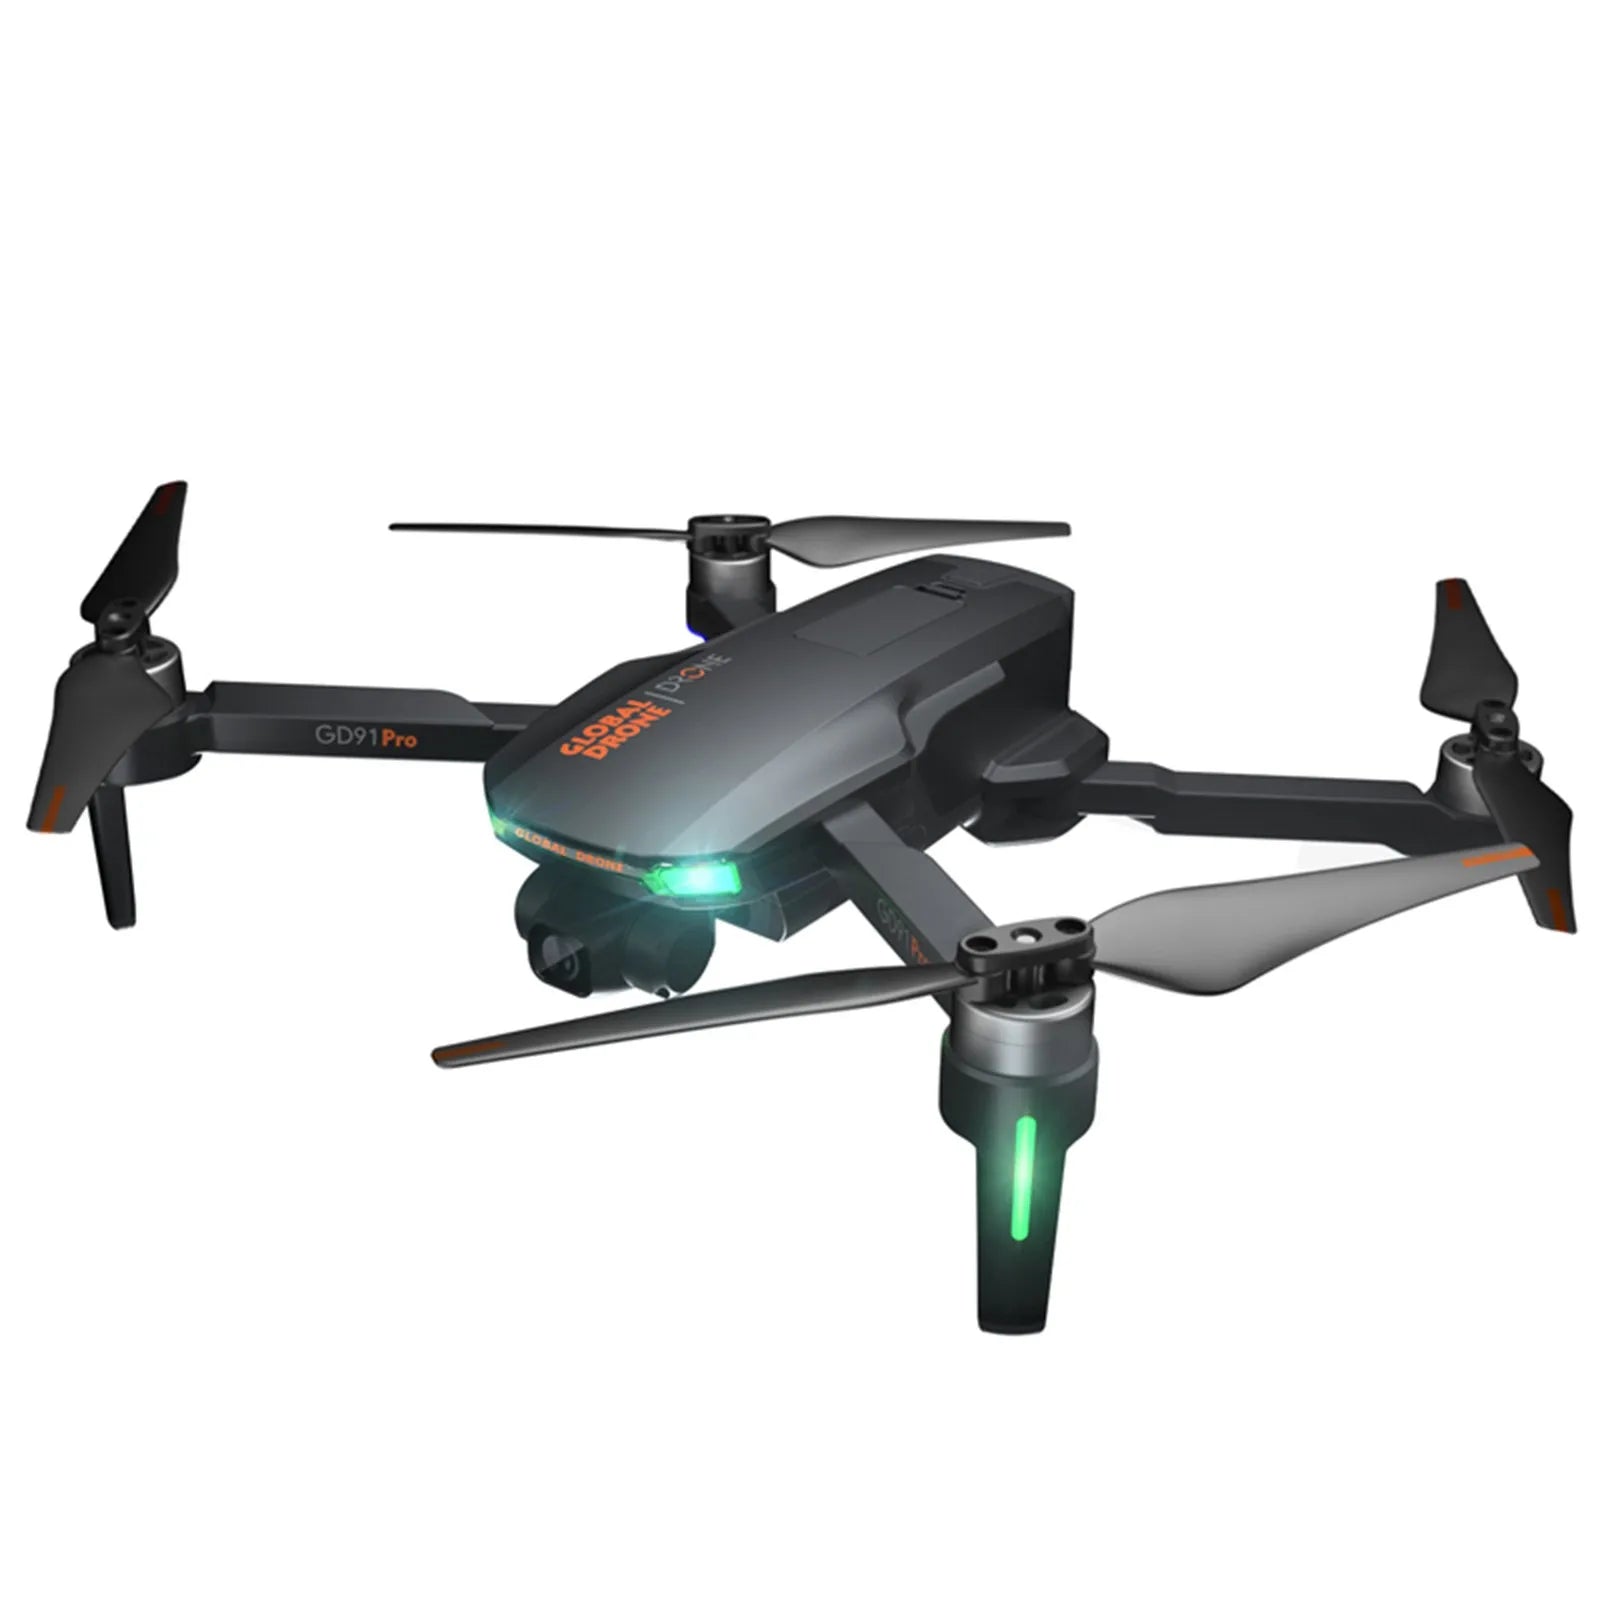 GD91 PRO Drone Specifications Brand Name: Toanel Drone Model Number: